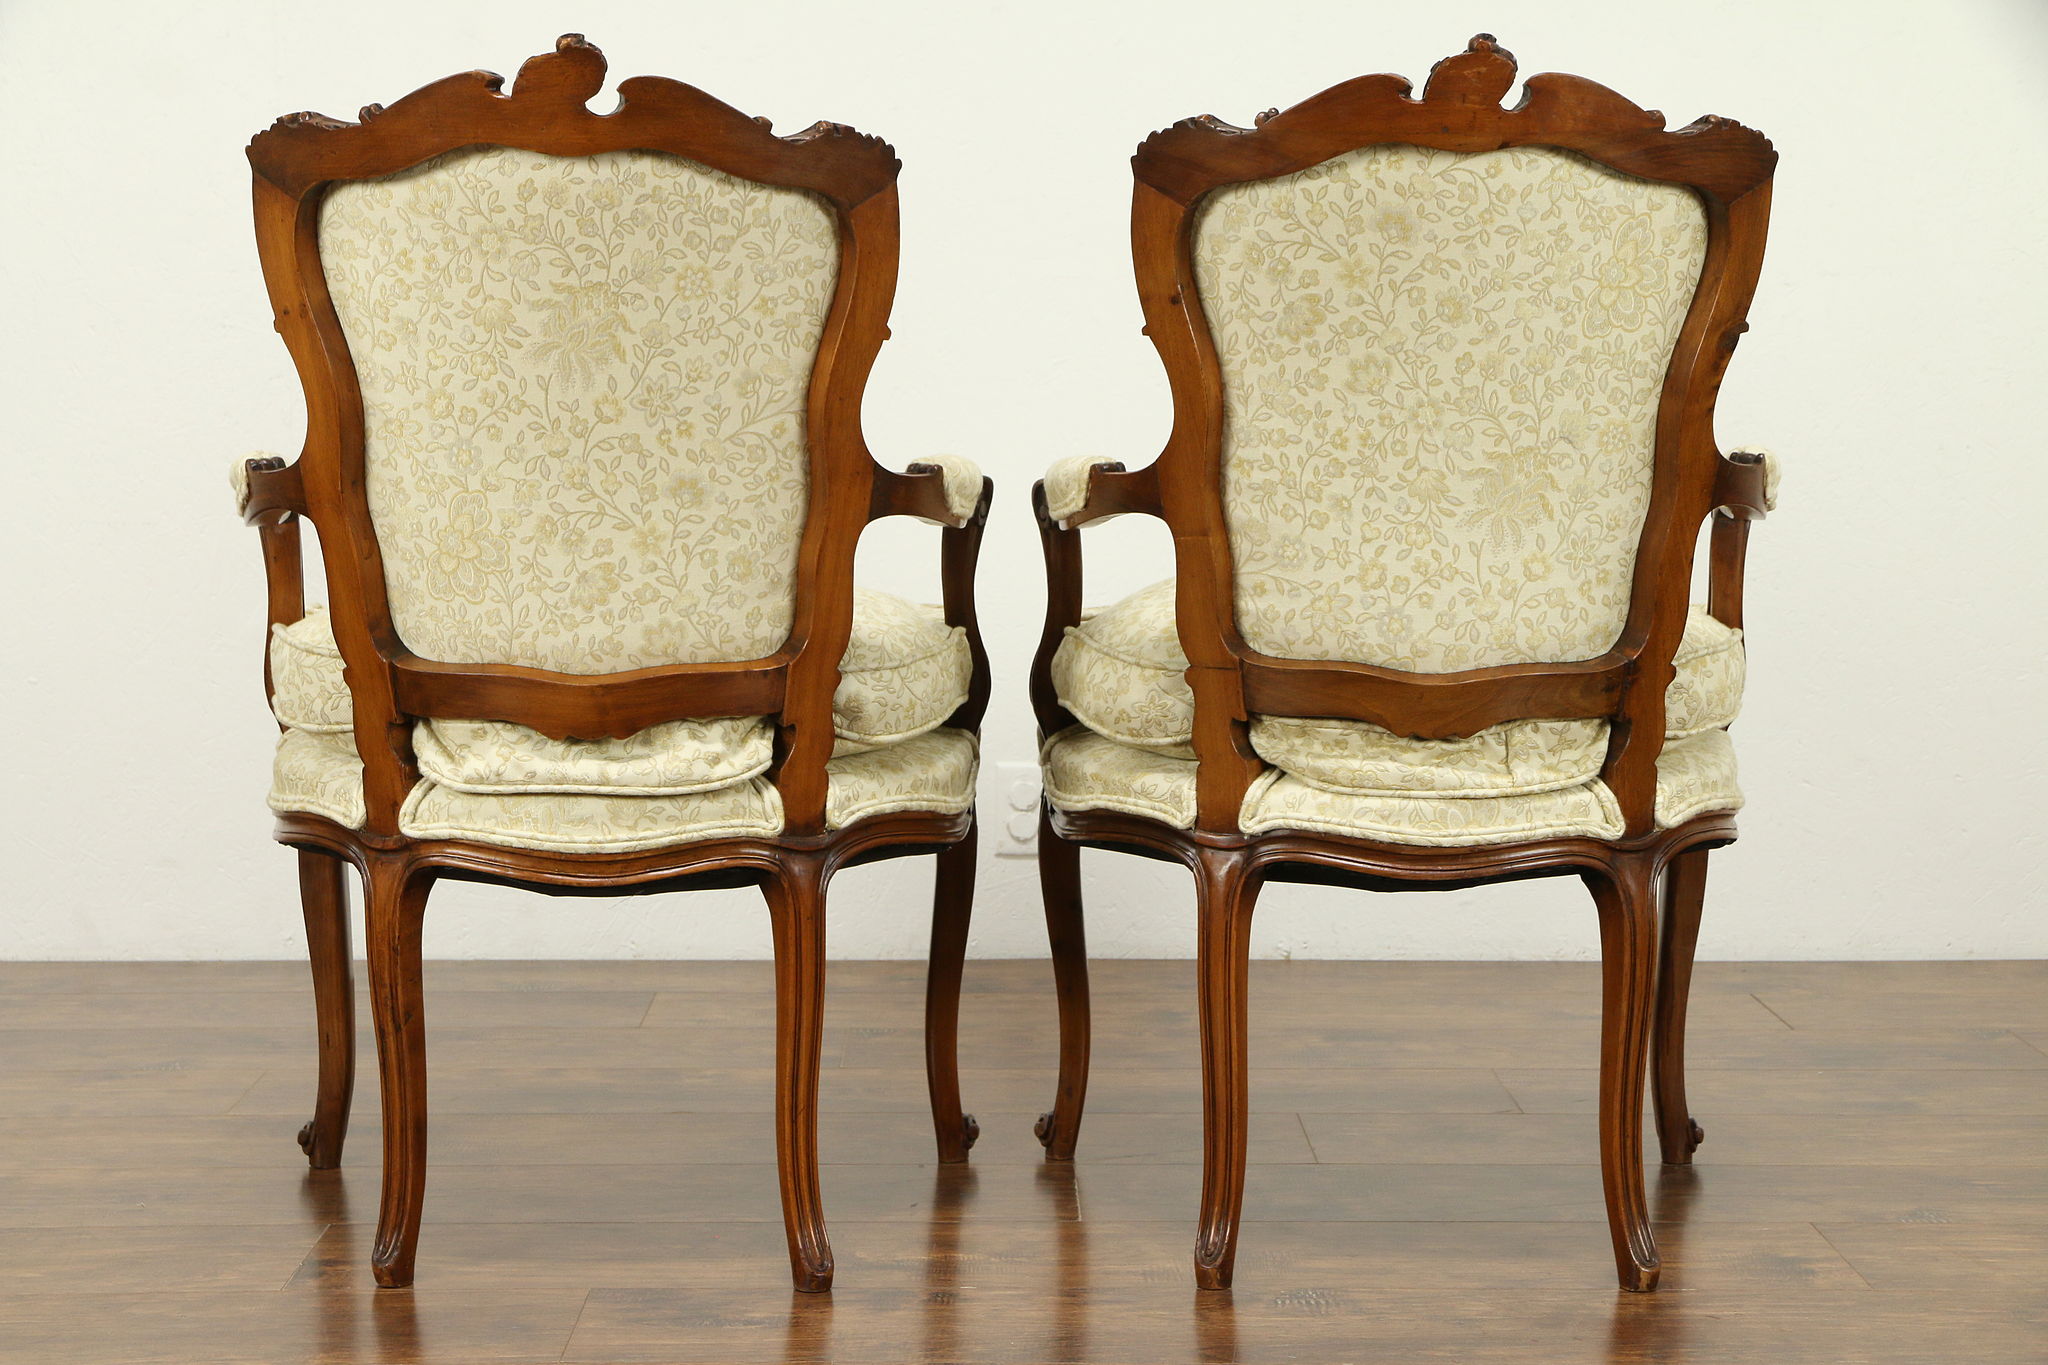 Sold at Auction: French Louis XV Rococo Style Chair On Casters